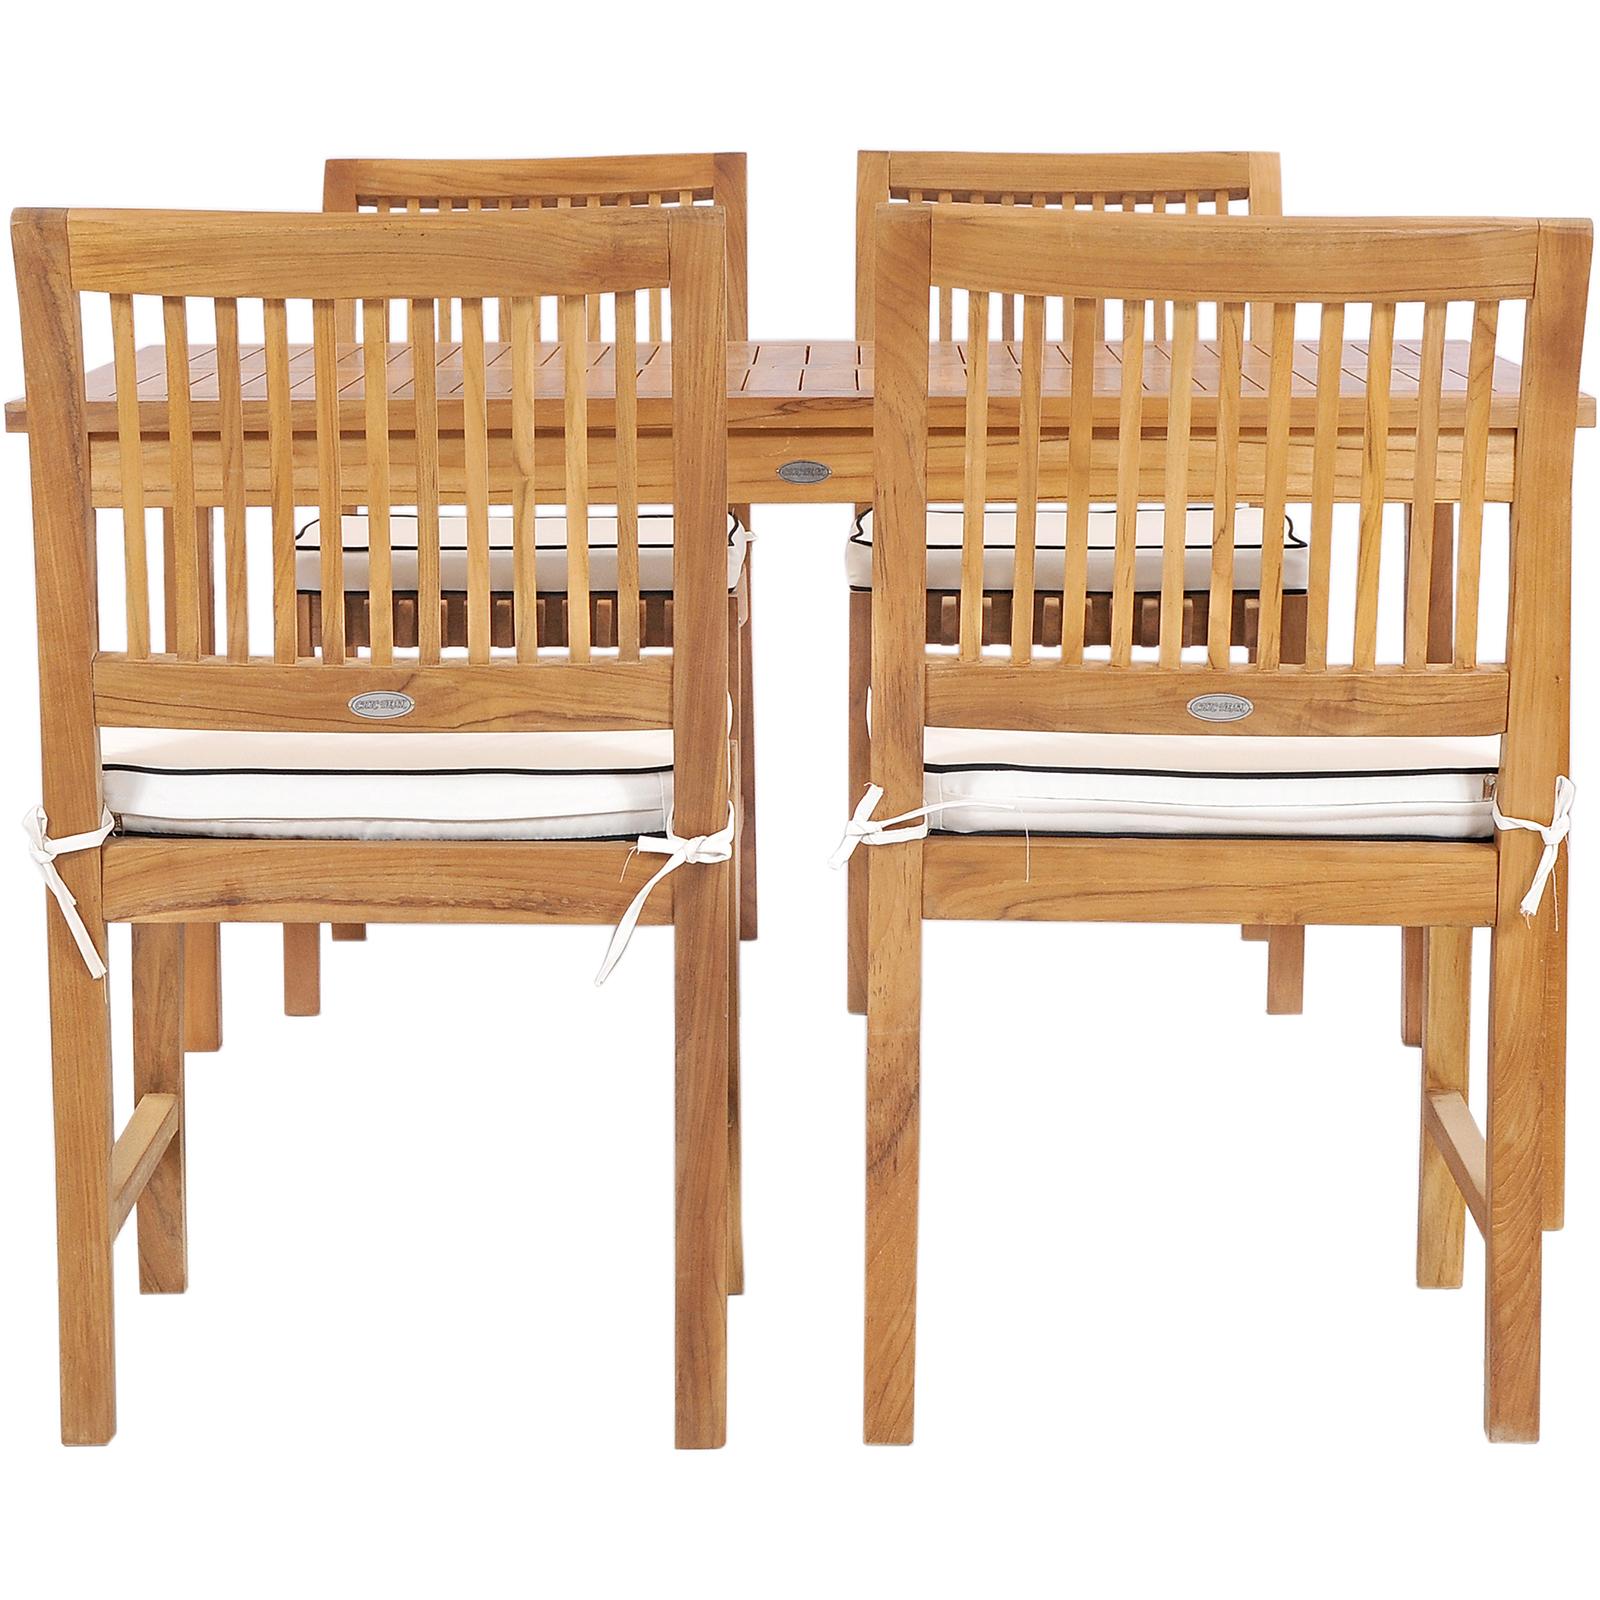 Chic Teak Bermuda 5 Piece Teak Wood Patio Dining Set with Side Chairs - image 4 of 5